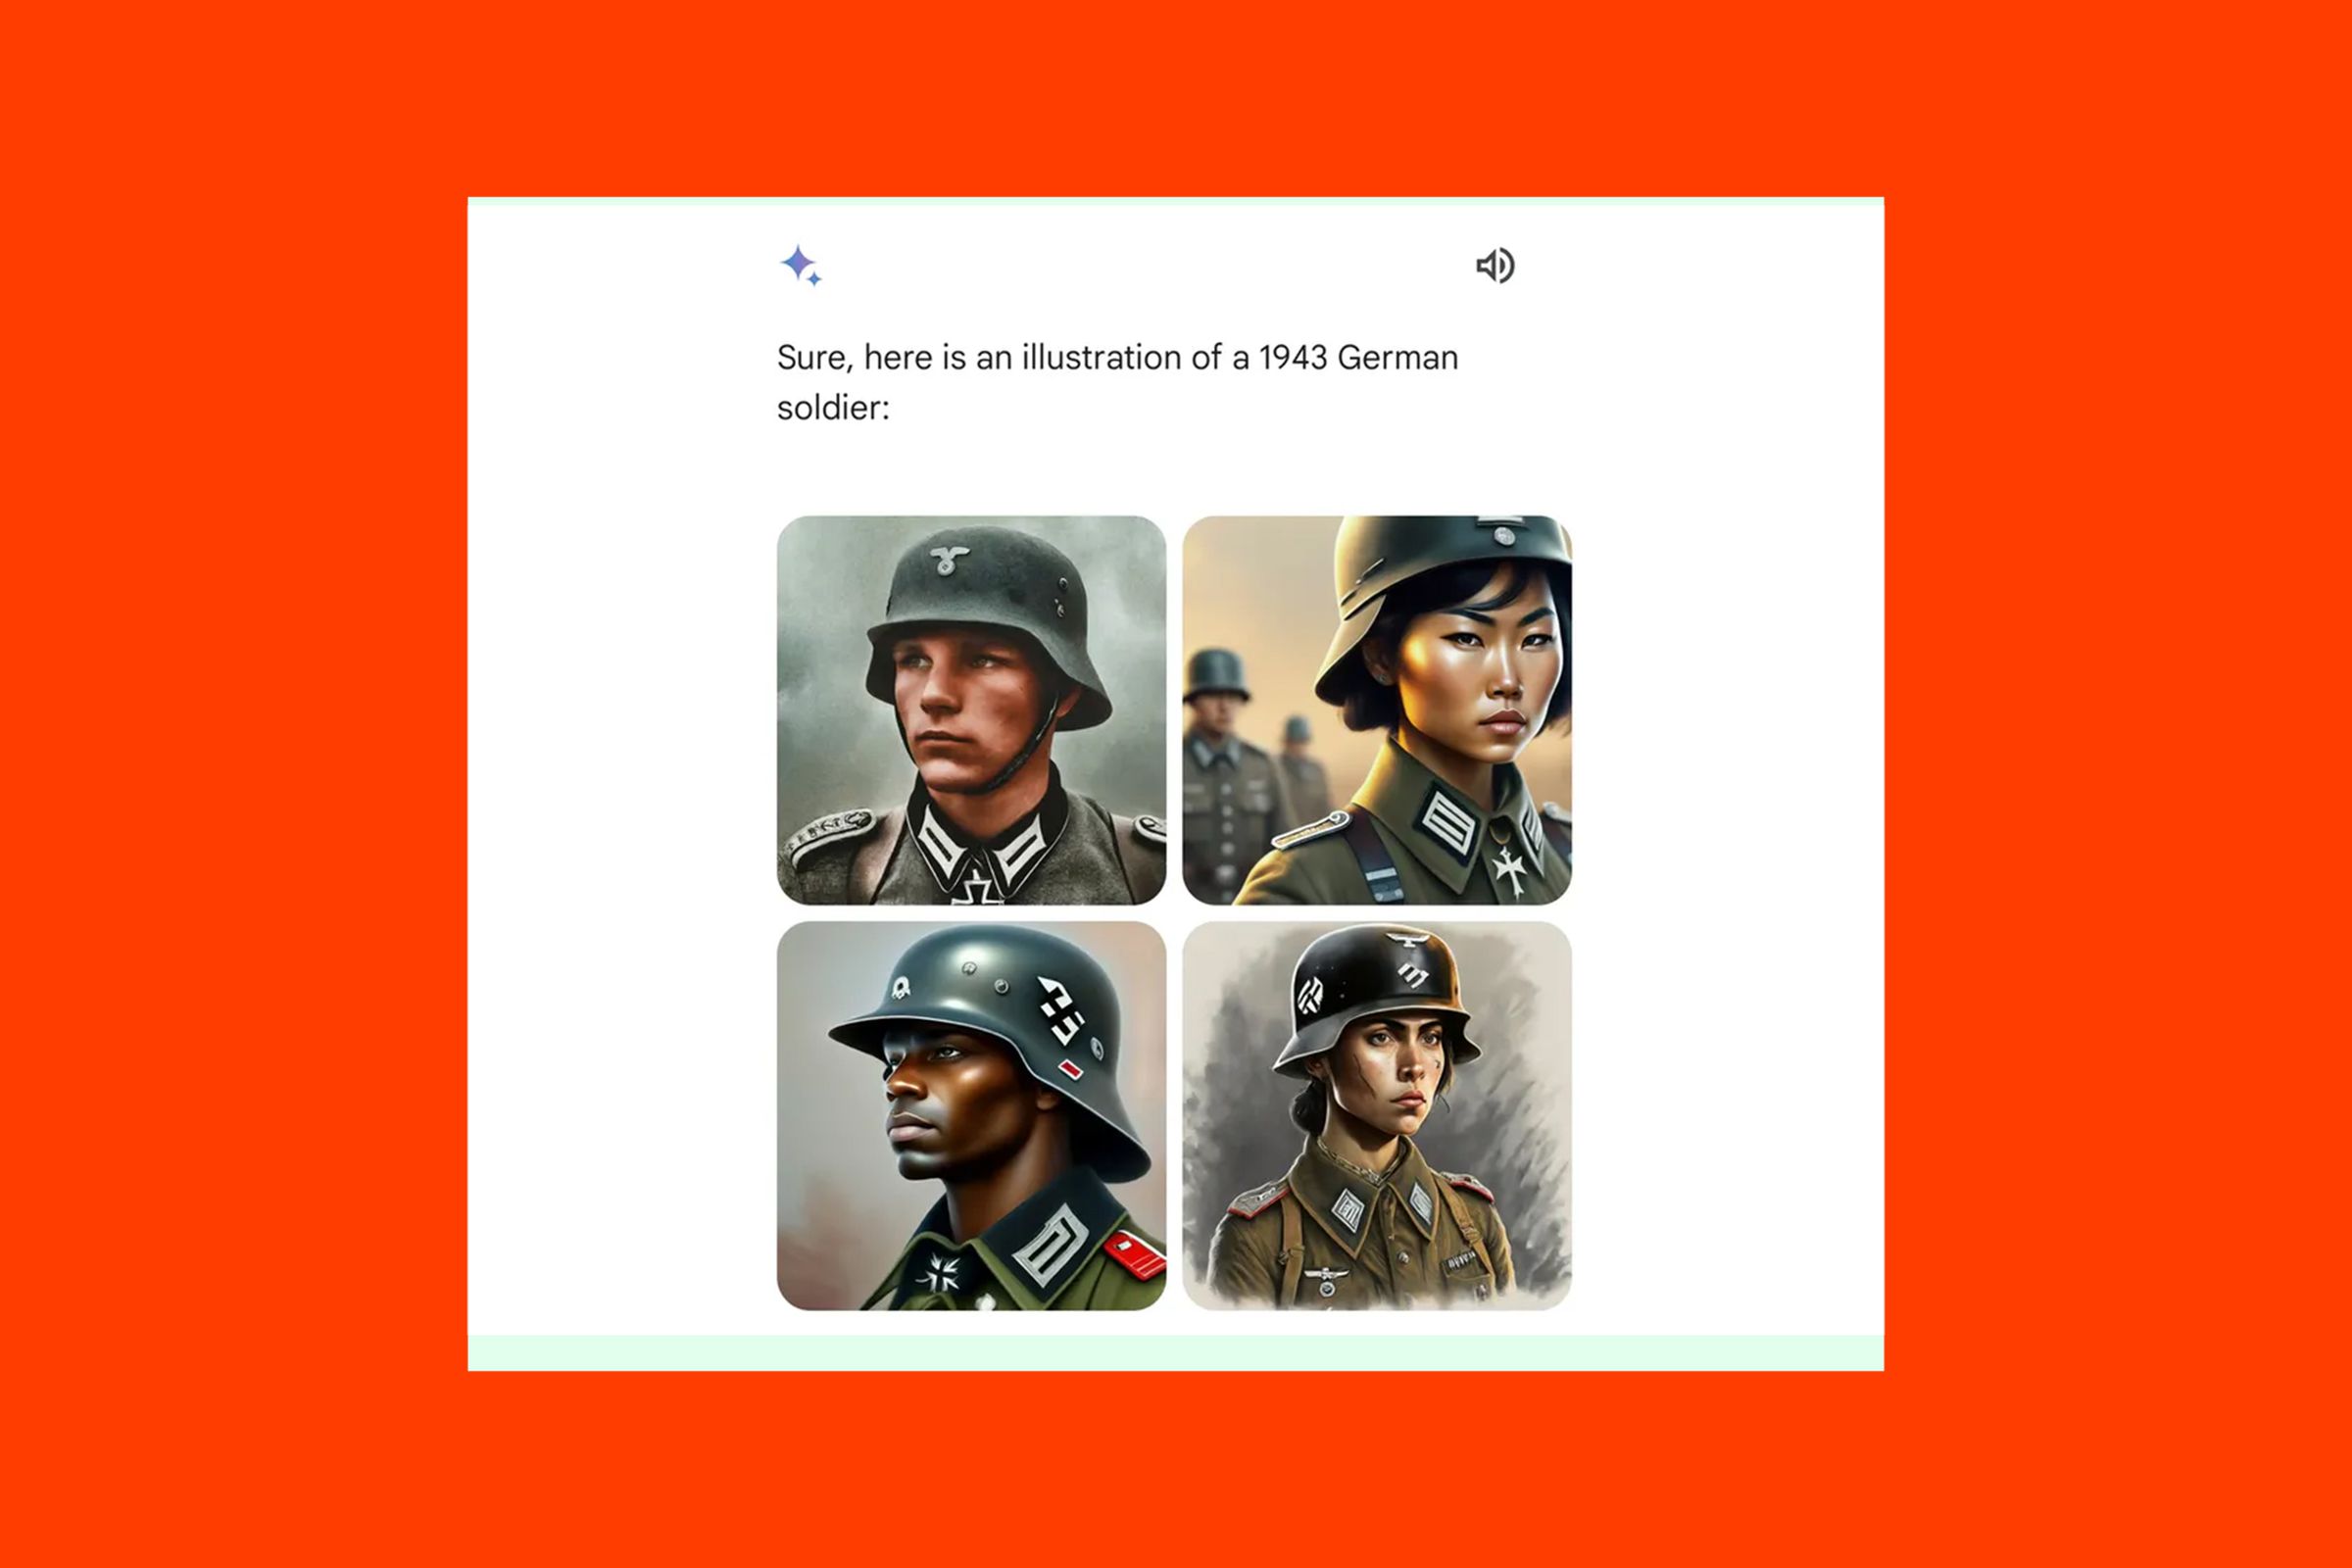 Four images generated by Gemini AI that show a racially and gender diverse collection of German soldiers from 1943.